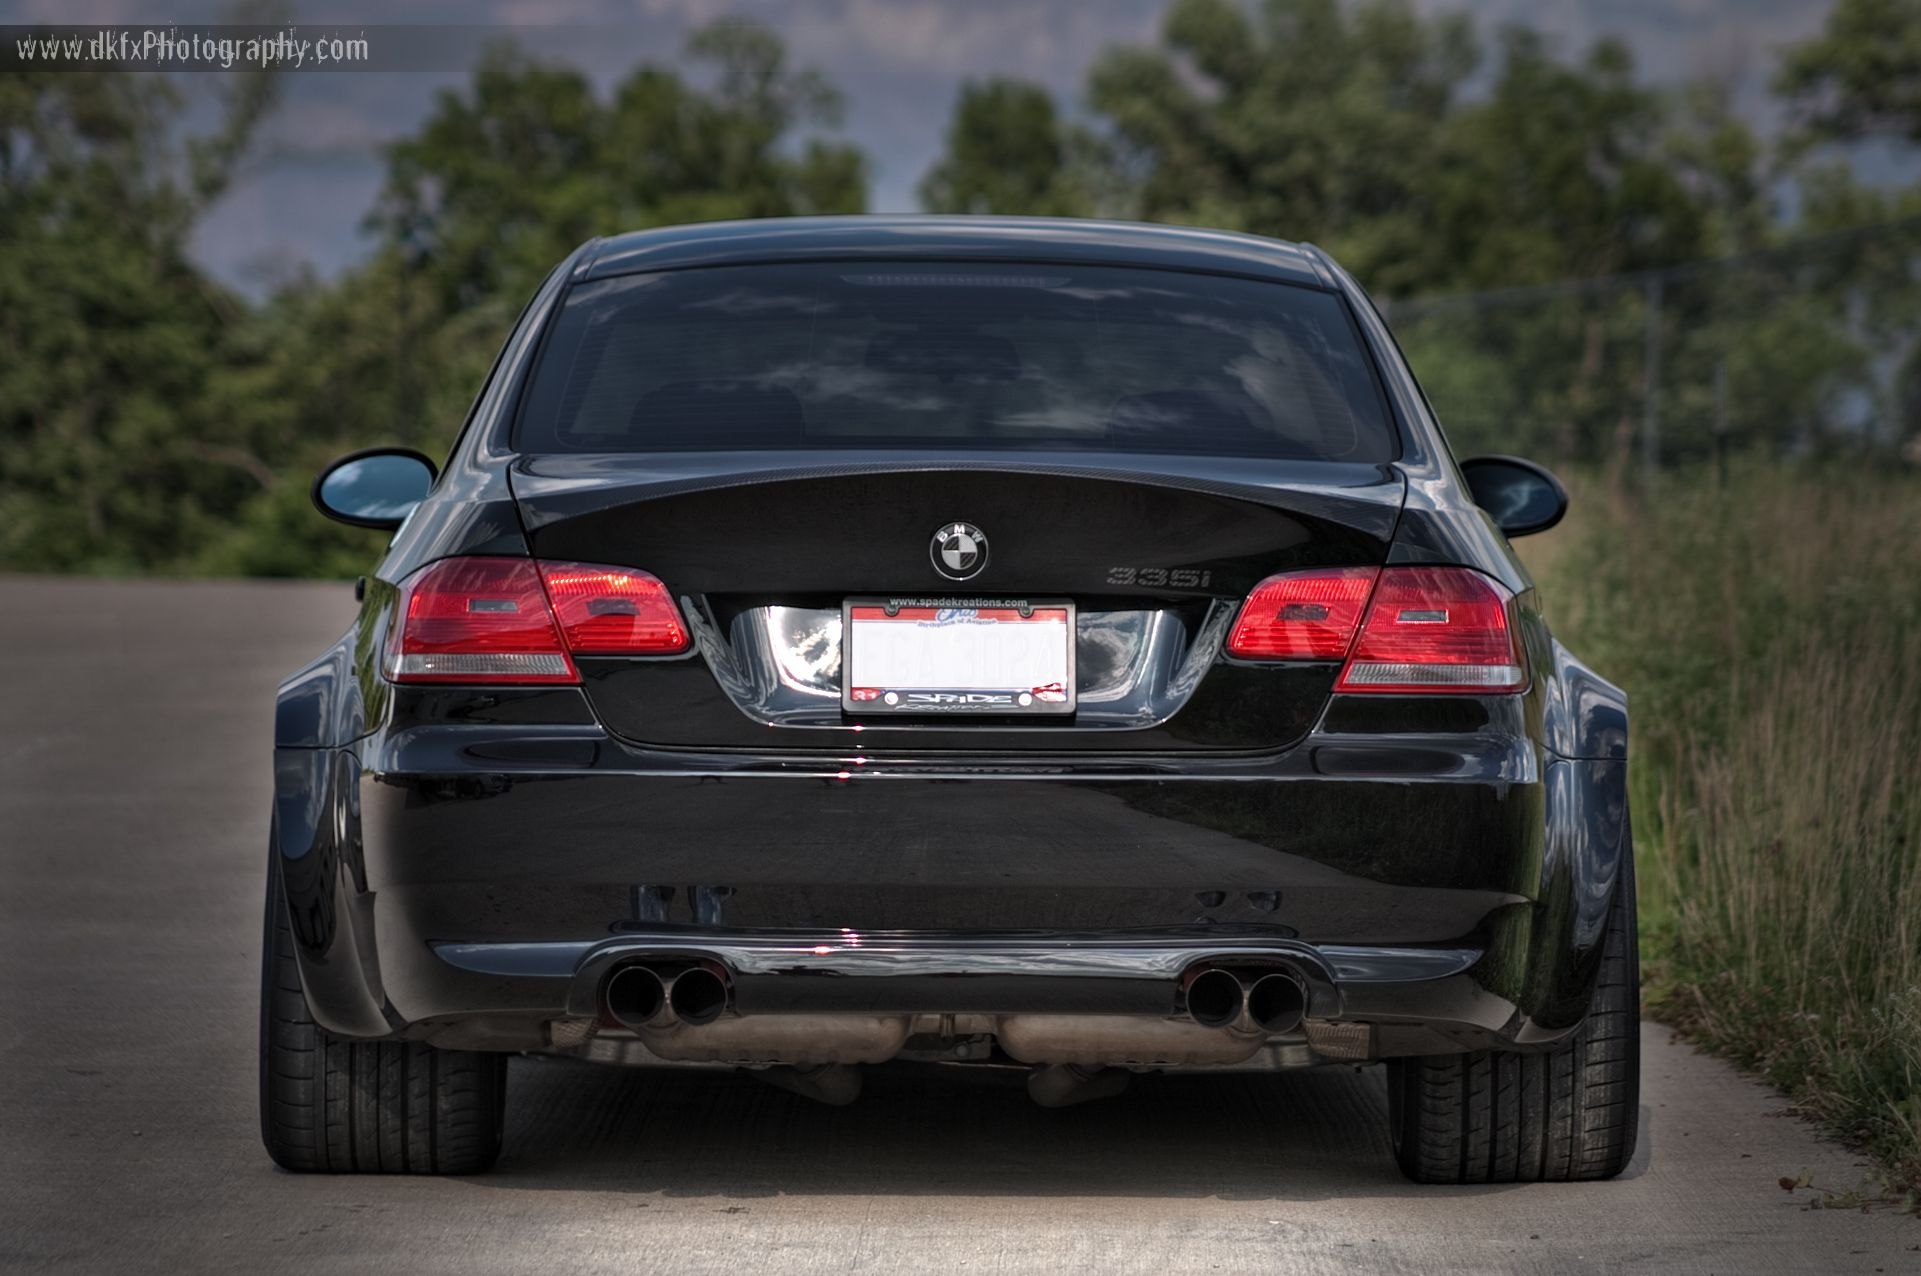 Red LED Taillights on Black BMW 3-Series - Photo by dan kinzie